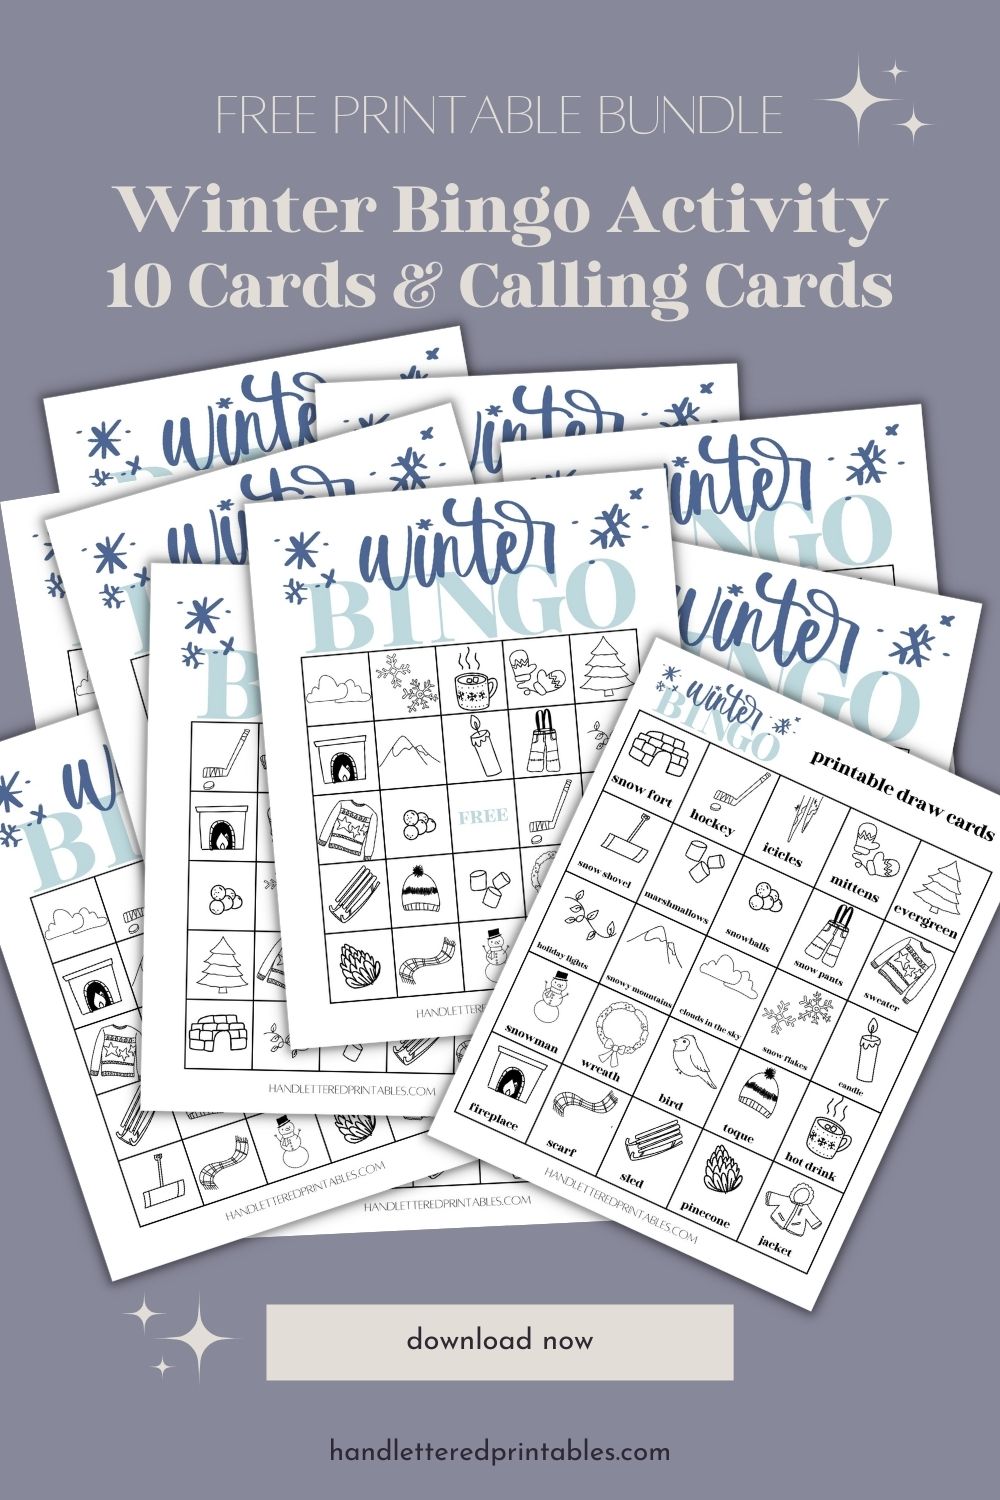 Text over reads free printable bundle: winter bingo activity 10 cards & calling cards. mockup of printable bingo cards stacked on purple background